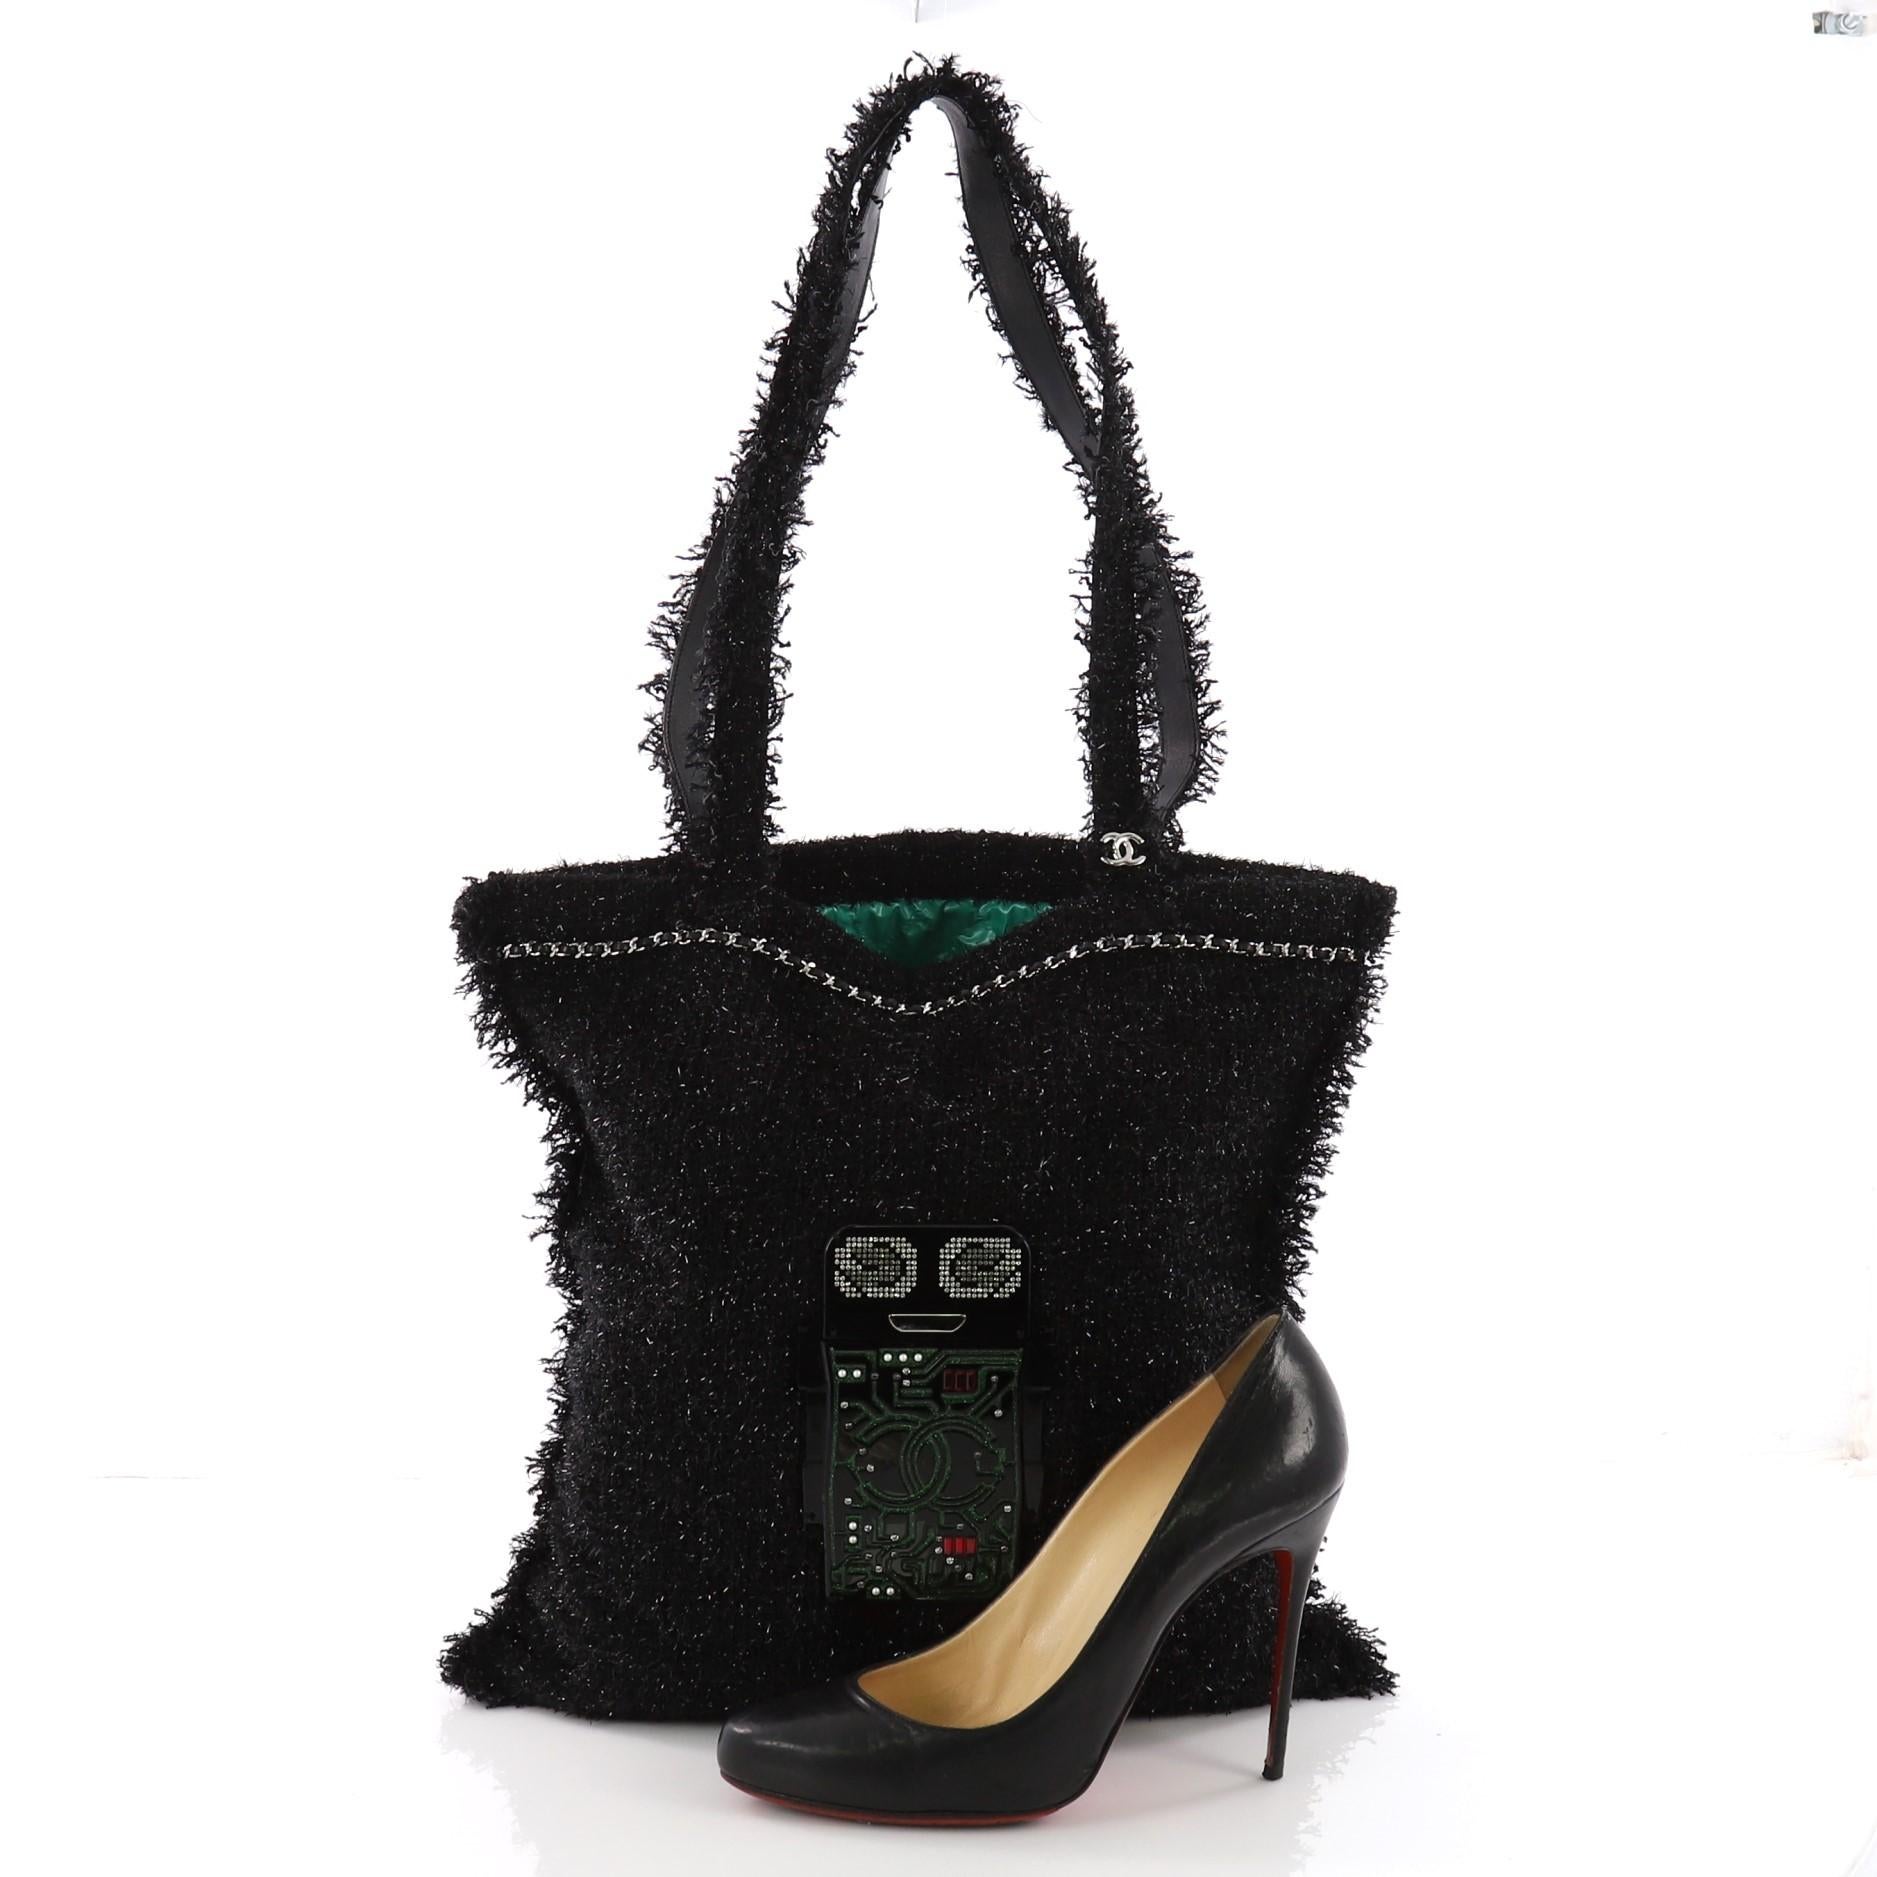 This Chanel Shopping Tote Embellished Tweed Large, crafted in black embellished tweed, features dual leather and tweed handles, ruffled trim throughout, plexiglass crystal embellishment, leather threaded top trim and silver-tone hardware. Its wide